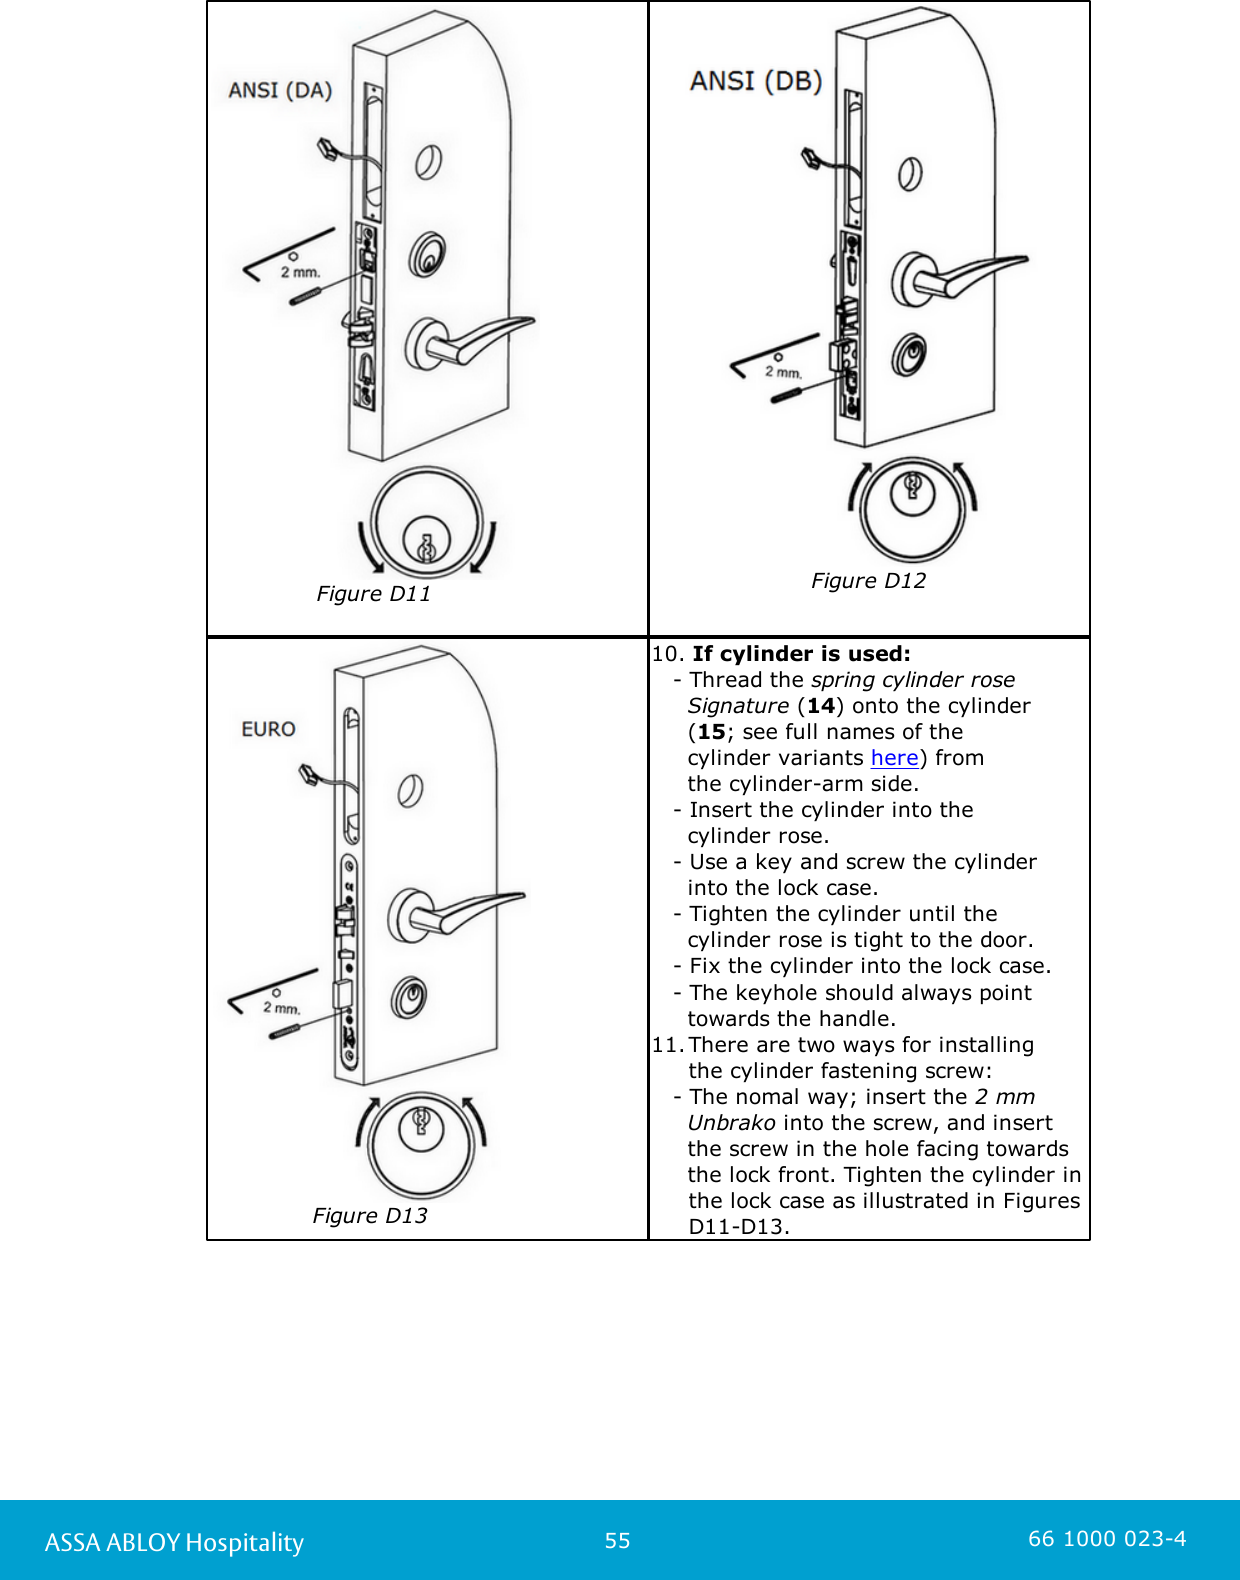 55ASSA ABLOY Hospitality 66 1000 023-4Figure D11Figure D12Figure D1310. If cylinder is used:   - Thread the spring cylinder roseSignature (14) onto the cylinder(15; see full names of thecylinder variants here) from the cylinder-arm side.    - Insert the cylinder into the cylinder rose.    - Use a key and screw the cylinder    into the lock case.    - Tighten the cylinder until the     cylinder rose is tight to the door.   - Fix the cylinder into the lock case.    - The keyhole should always point     towards the handle. 11.There are two ways for installing the cylinder fastening screw:    - The nomal way; insert the 2 mm       Unbrako into the screw, and insert     the screw in the hole facing towards     the lock front. Tighten the cylinder inthe lock case as illustrated in FiguresD11-D13. 